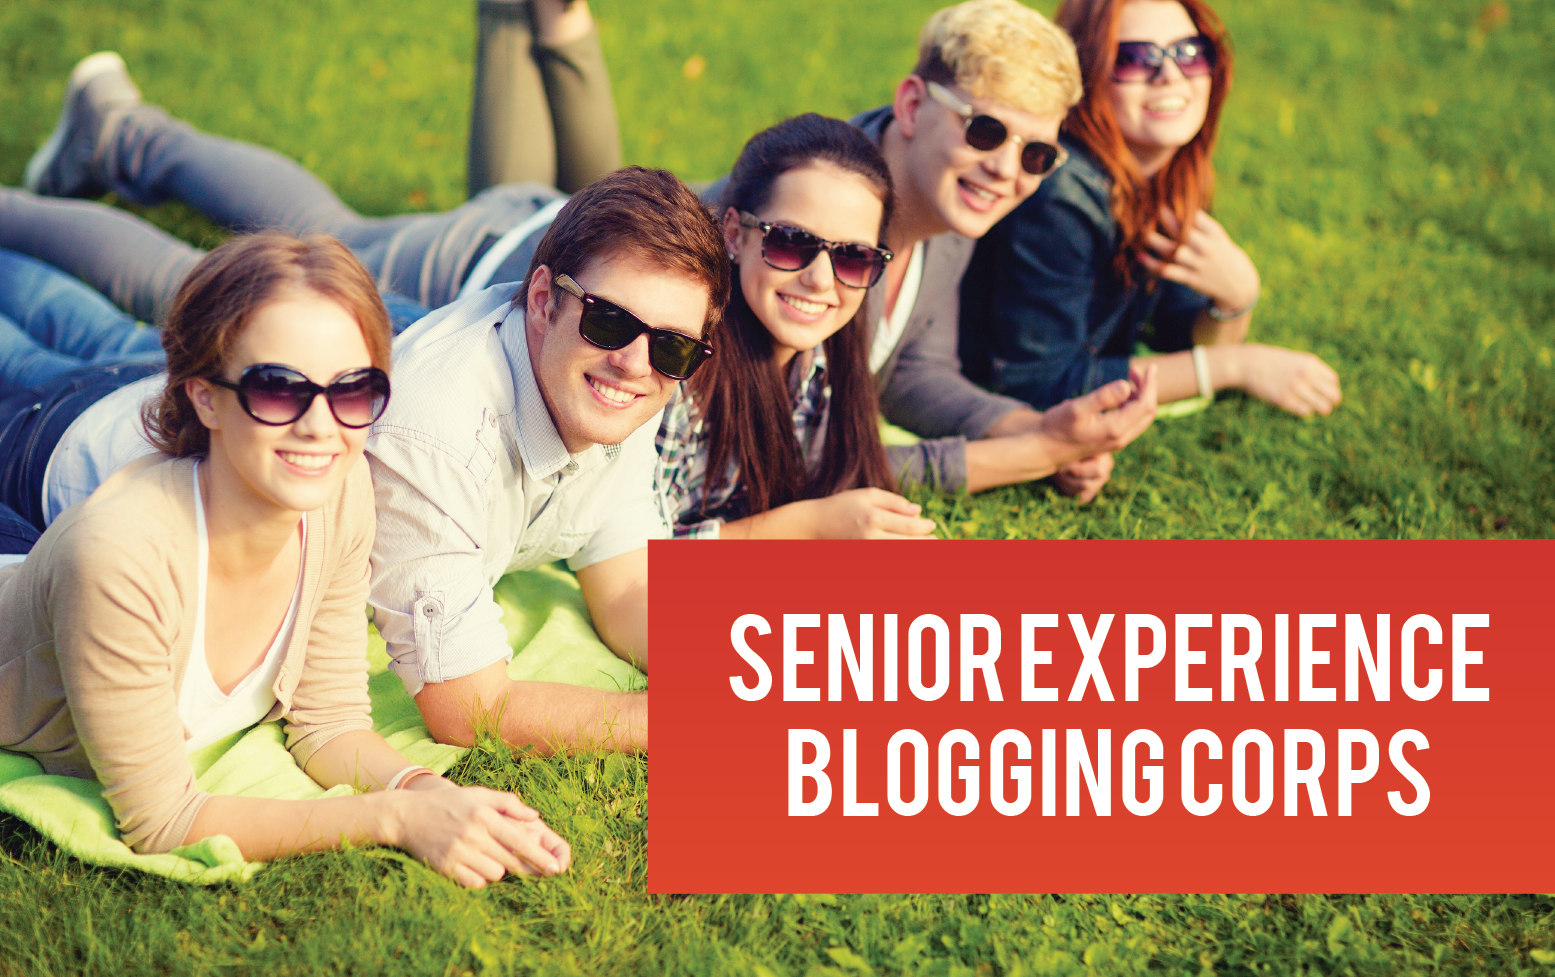 Students share their perspective on the Senior Blog Corps